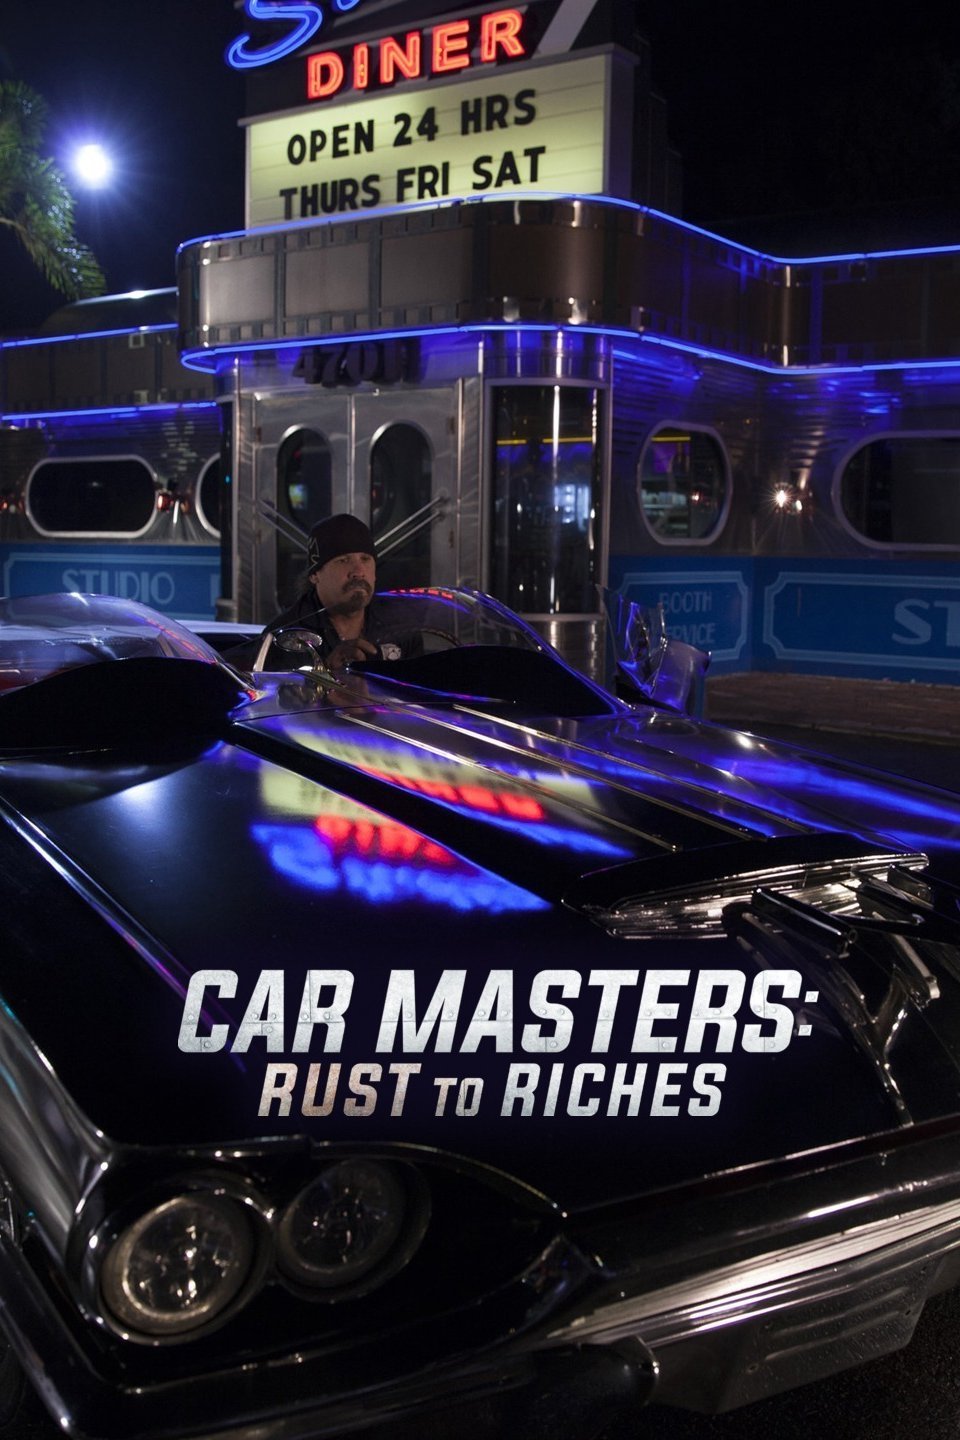 Car masters rust to riches concept car